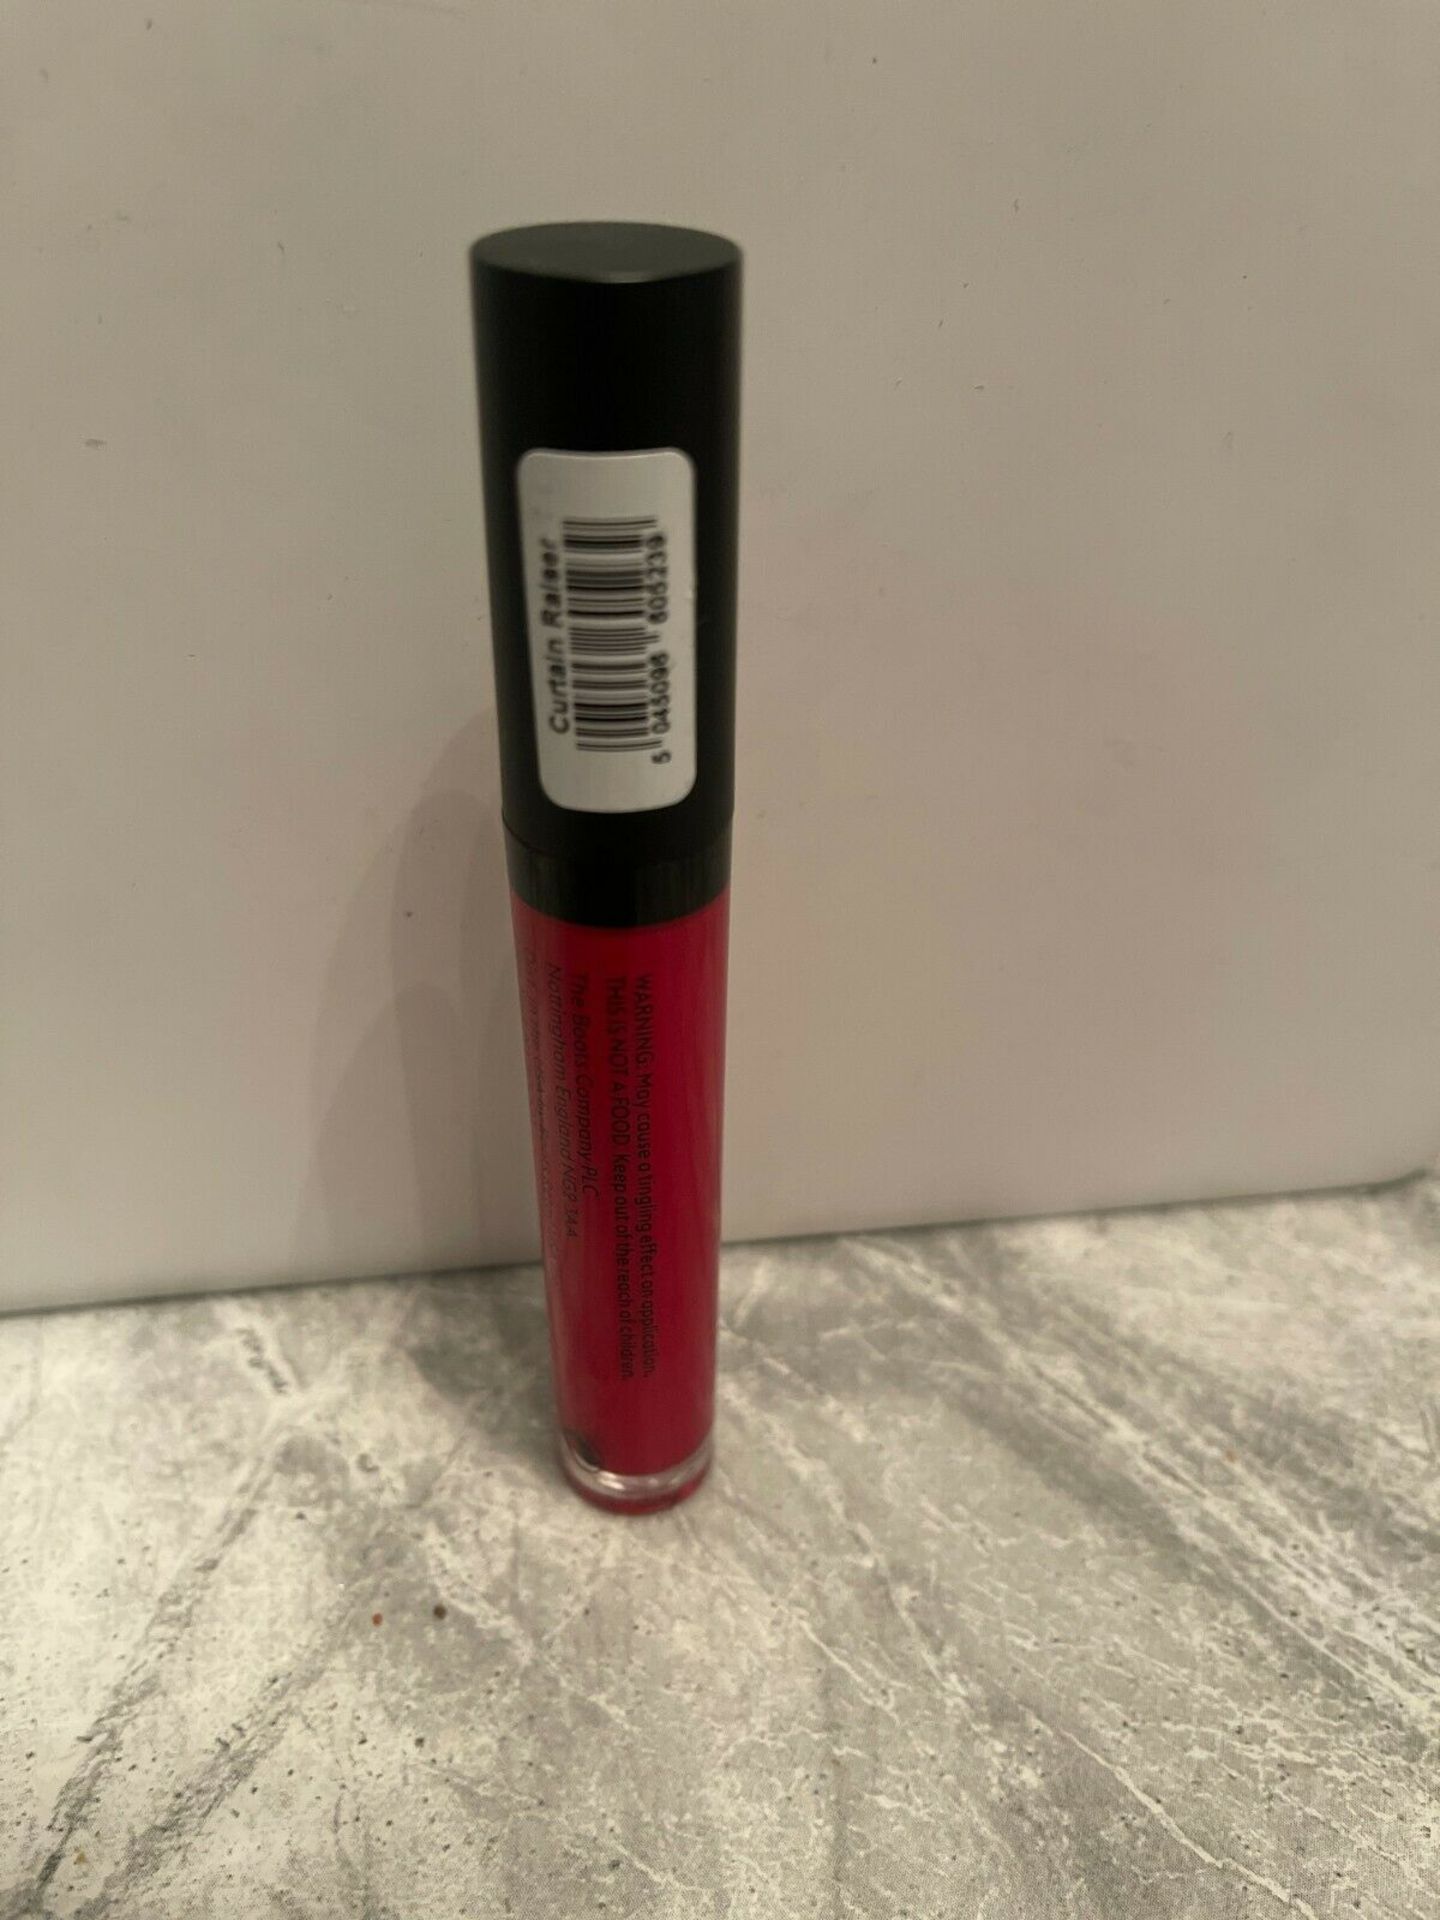 BOOTS C.Y.O Plumping Lip Gloss BRAND NEW - Image 2 of 2